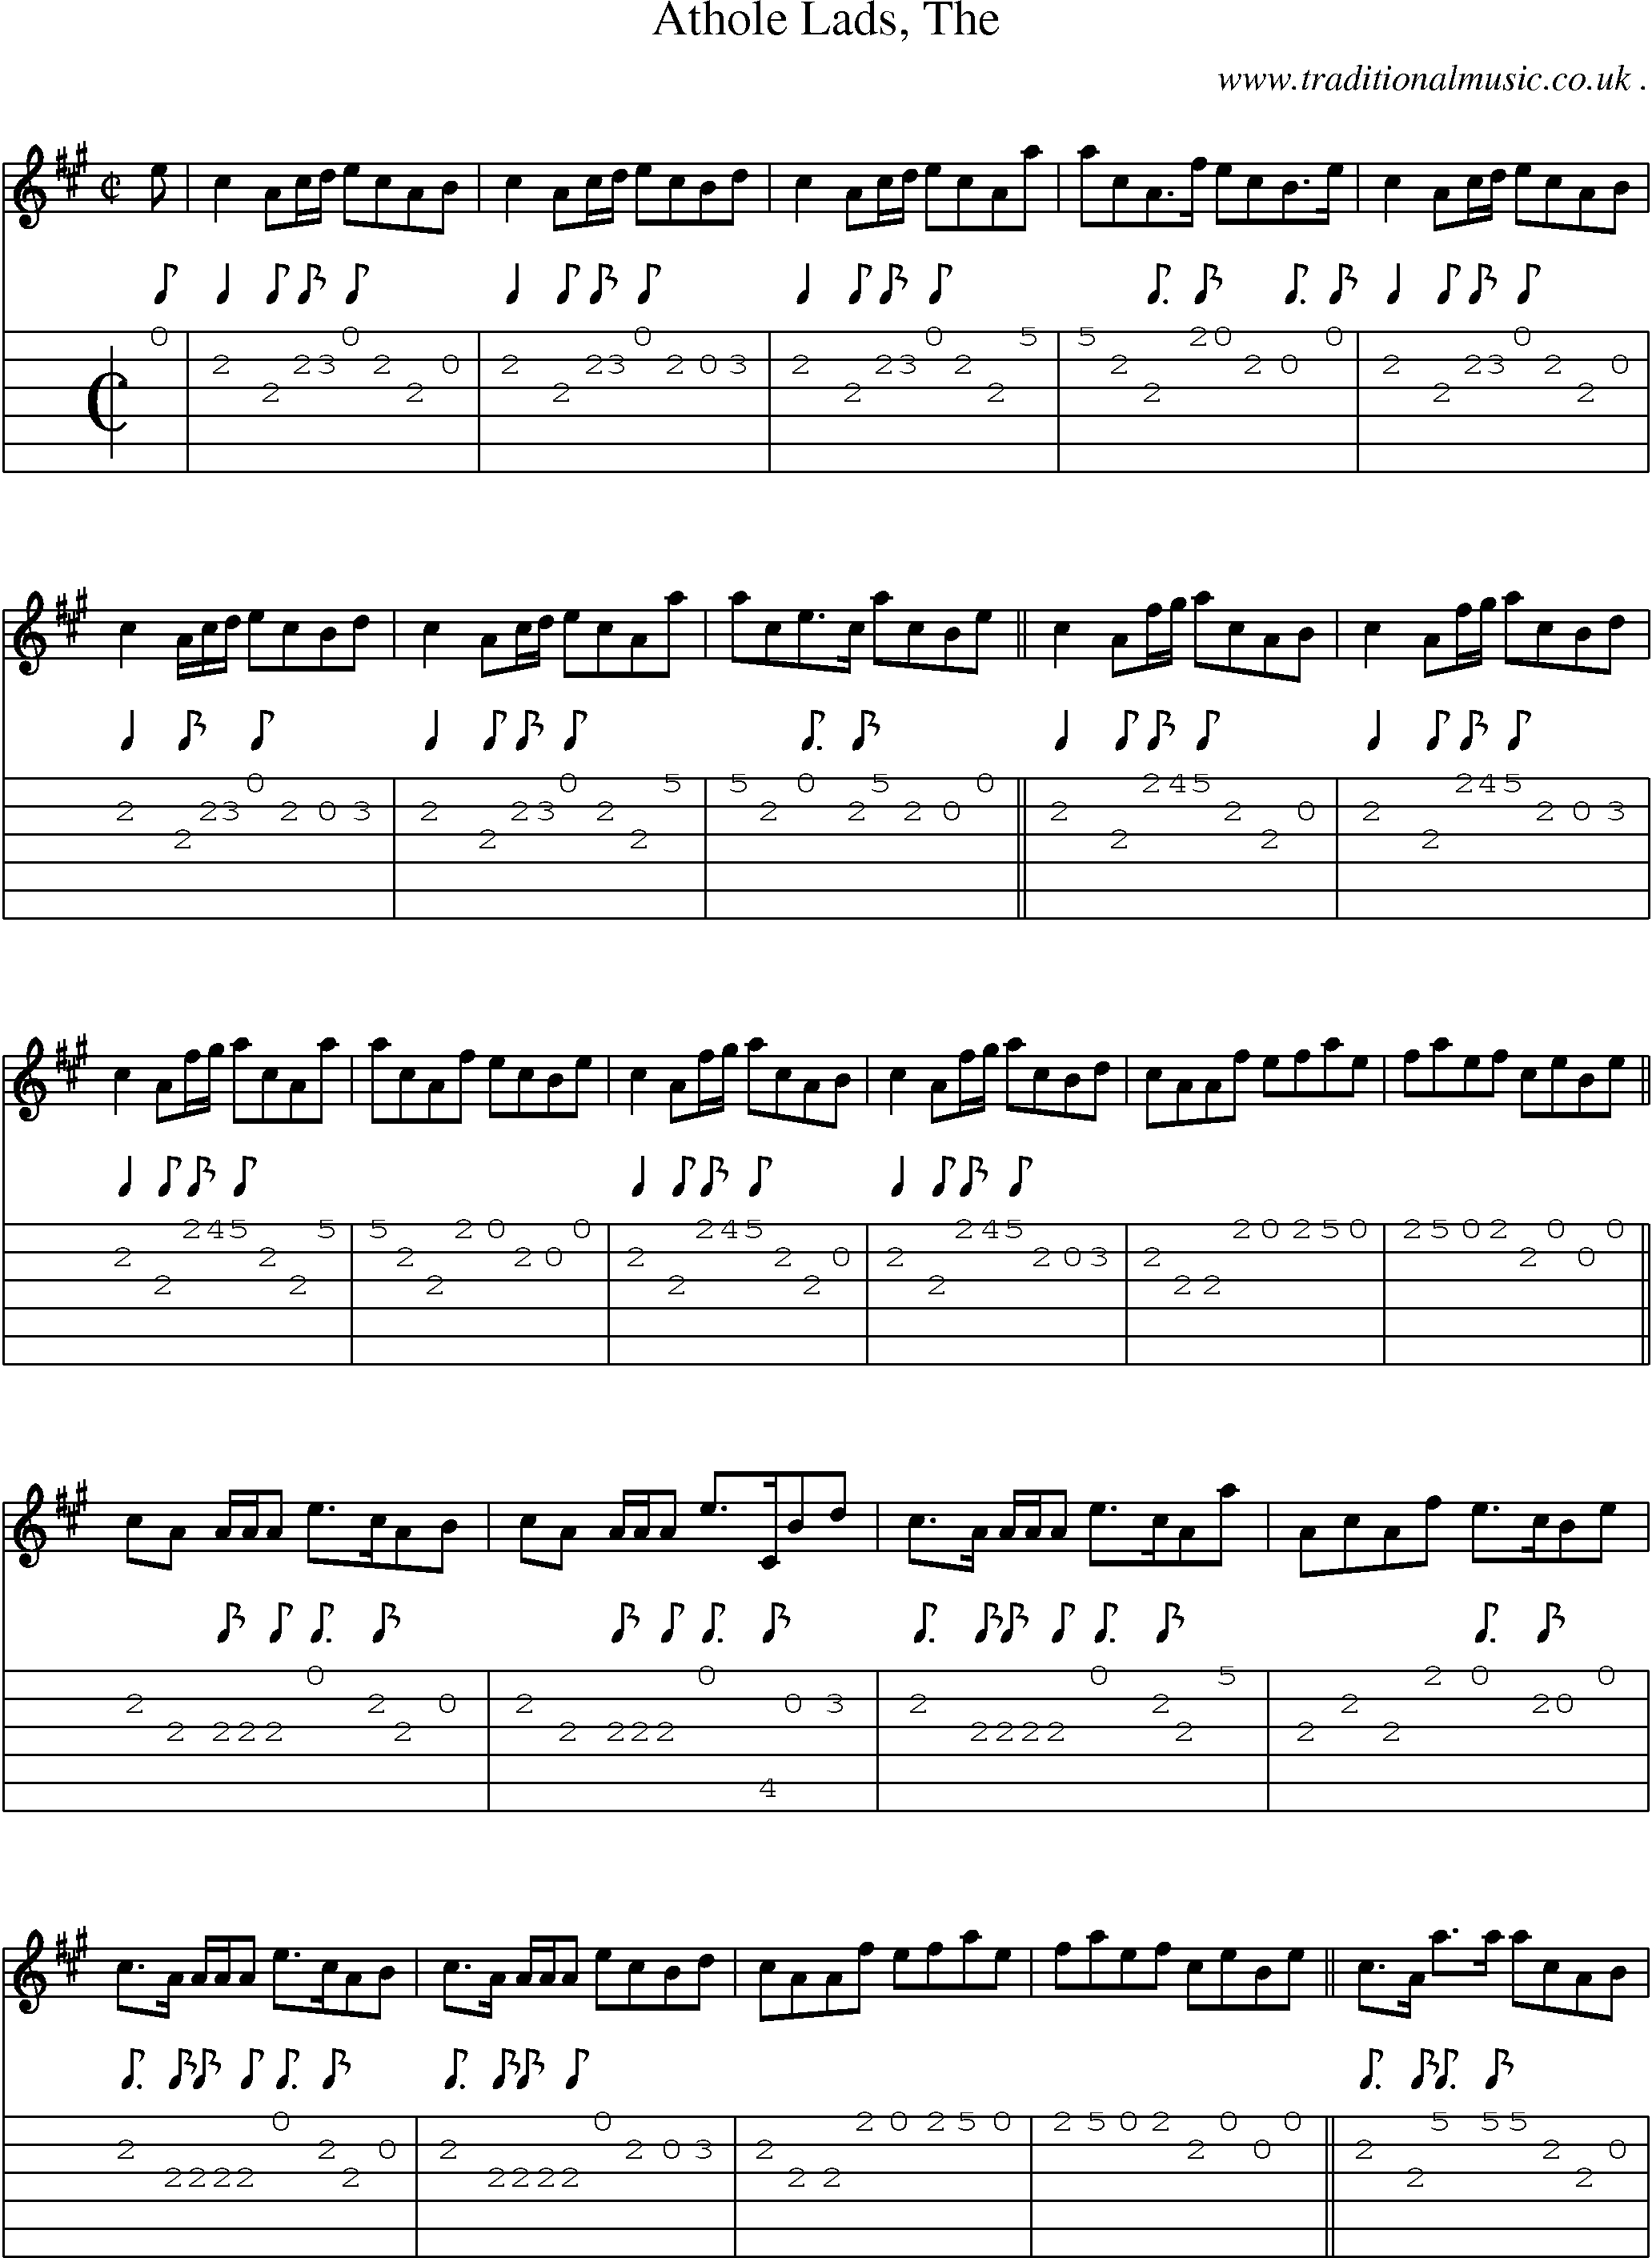 Sheet-music  score, Chords and Guitar Tabs for Athole Lads The